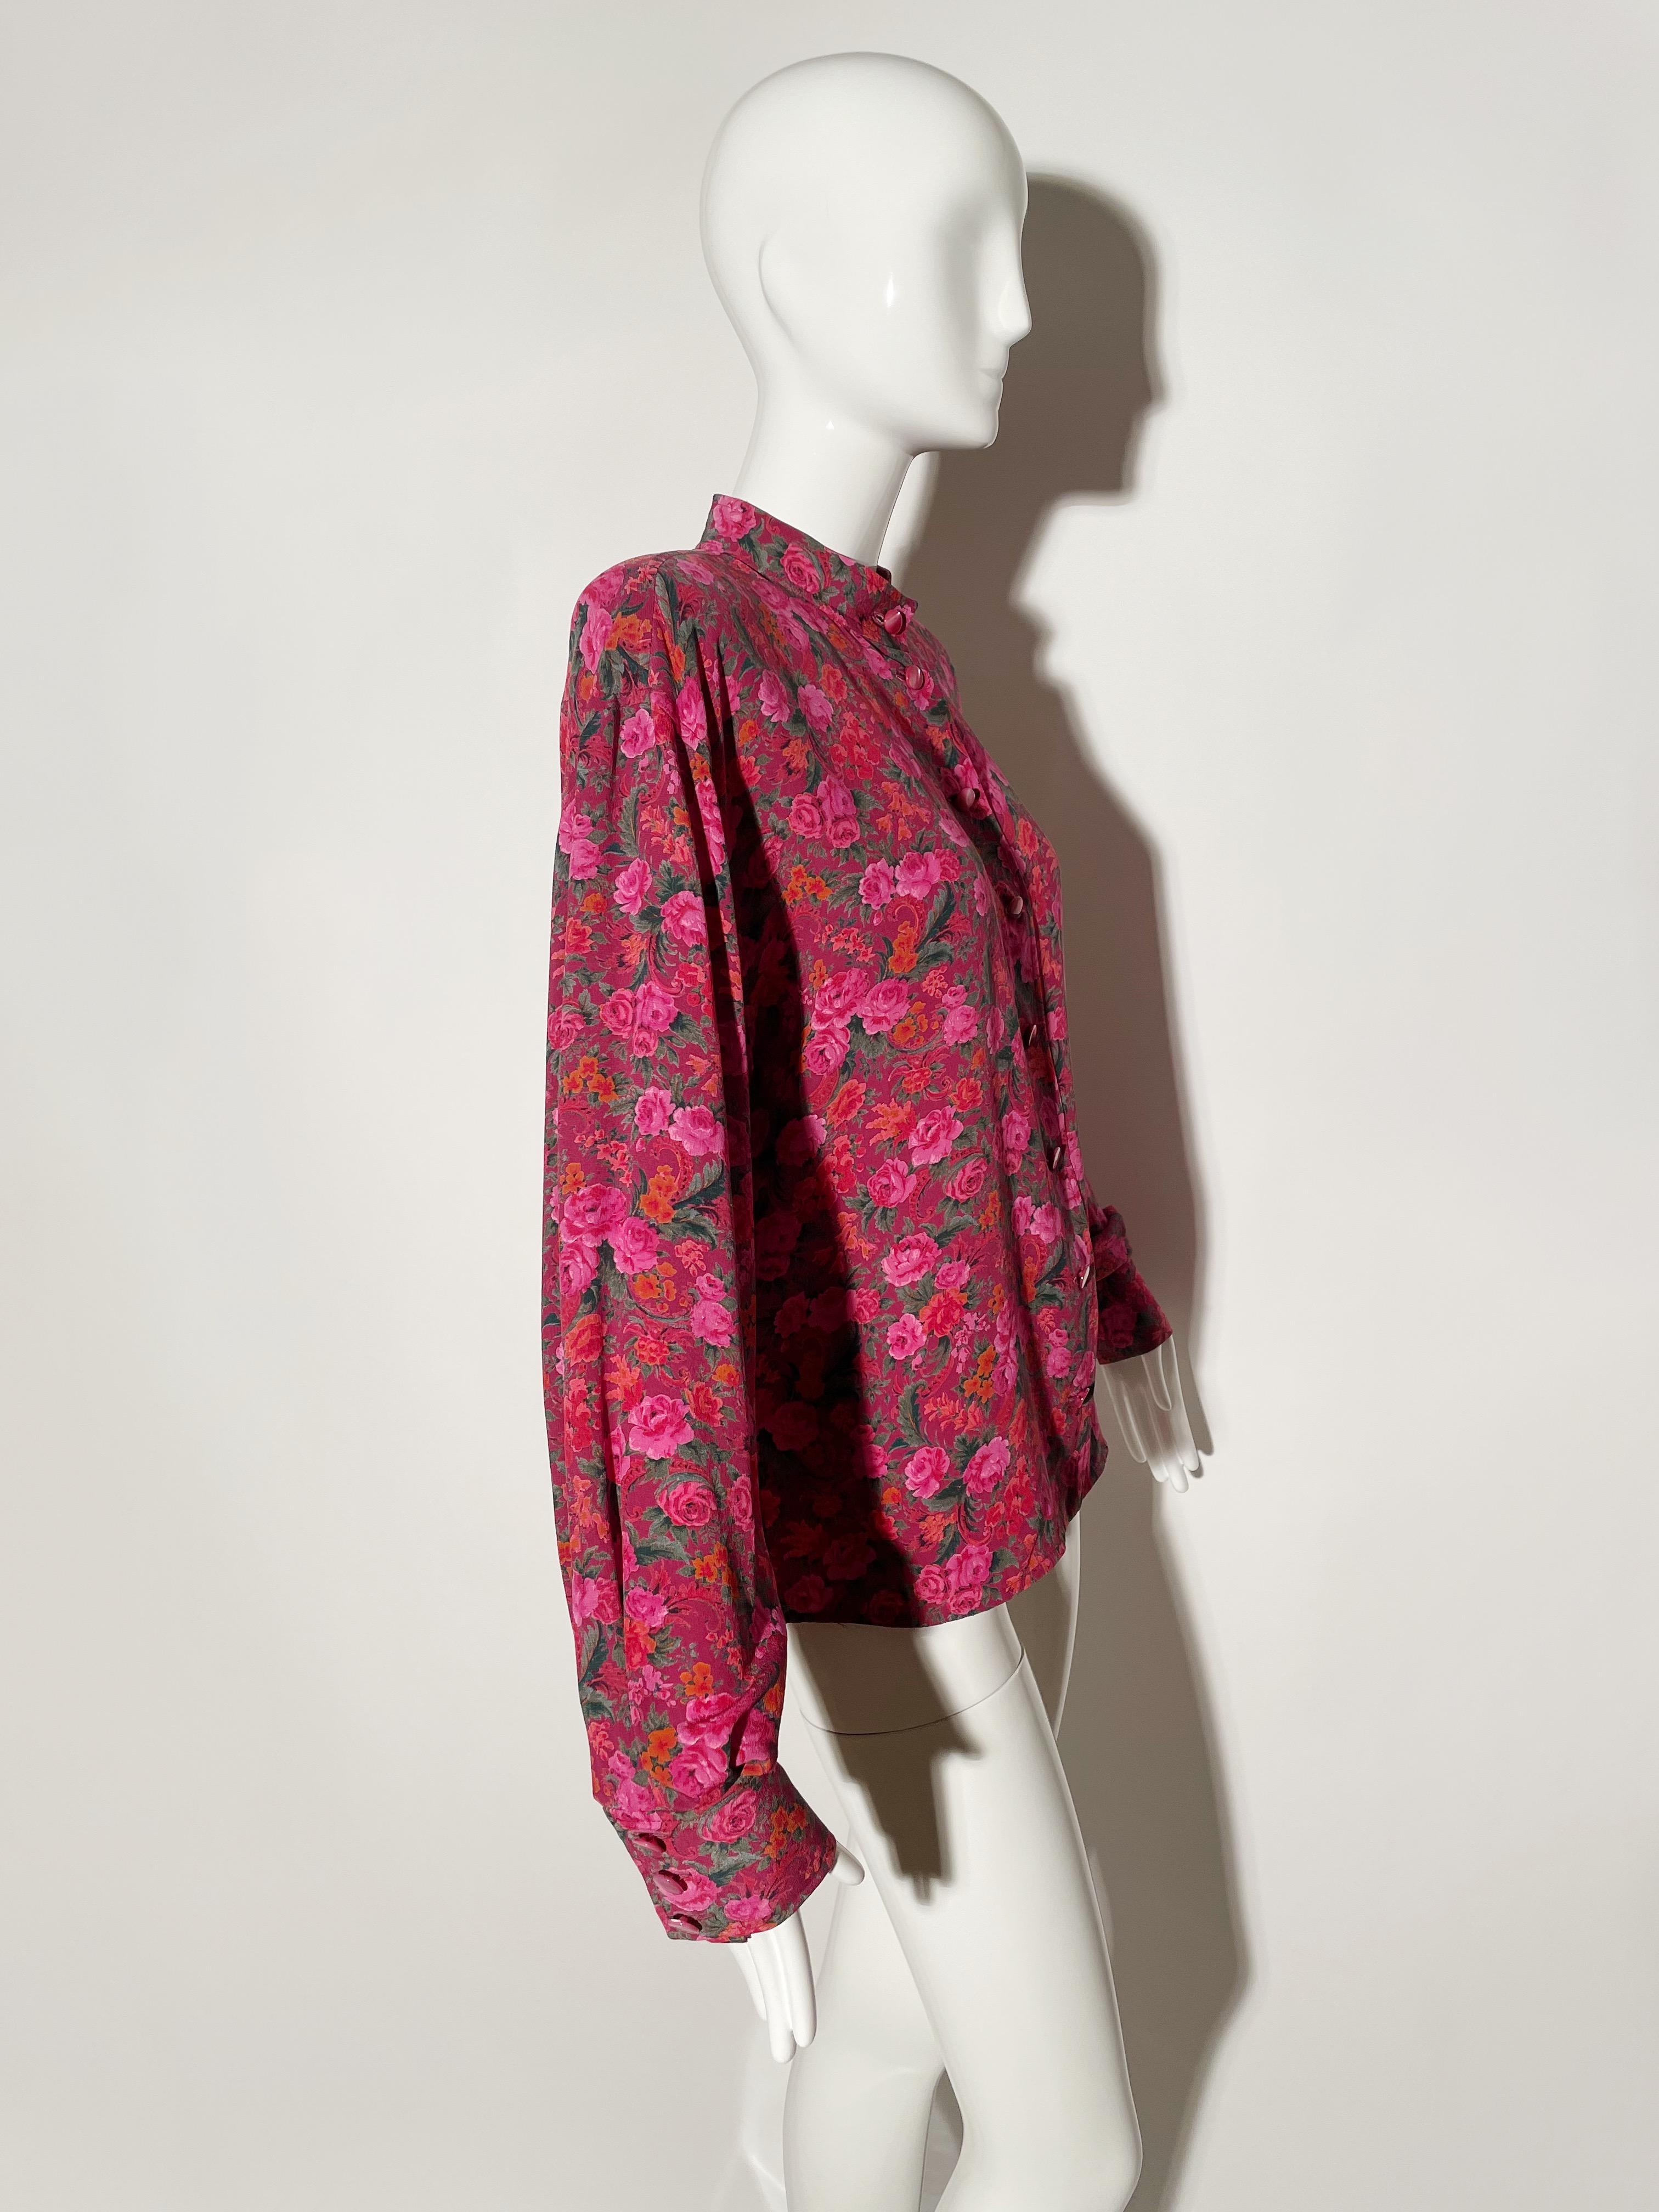 Emanuel Ungaro Pink Floral Blouse  In Excellent Condition For Sale In Los Angeles, CA